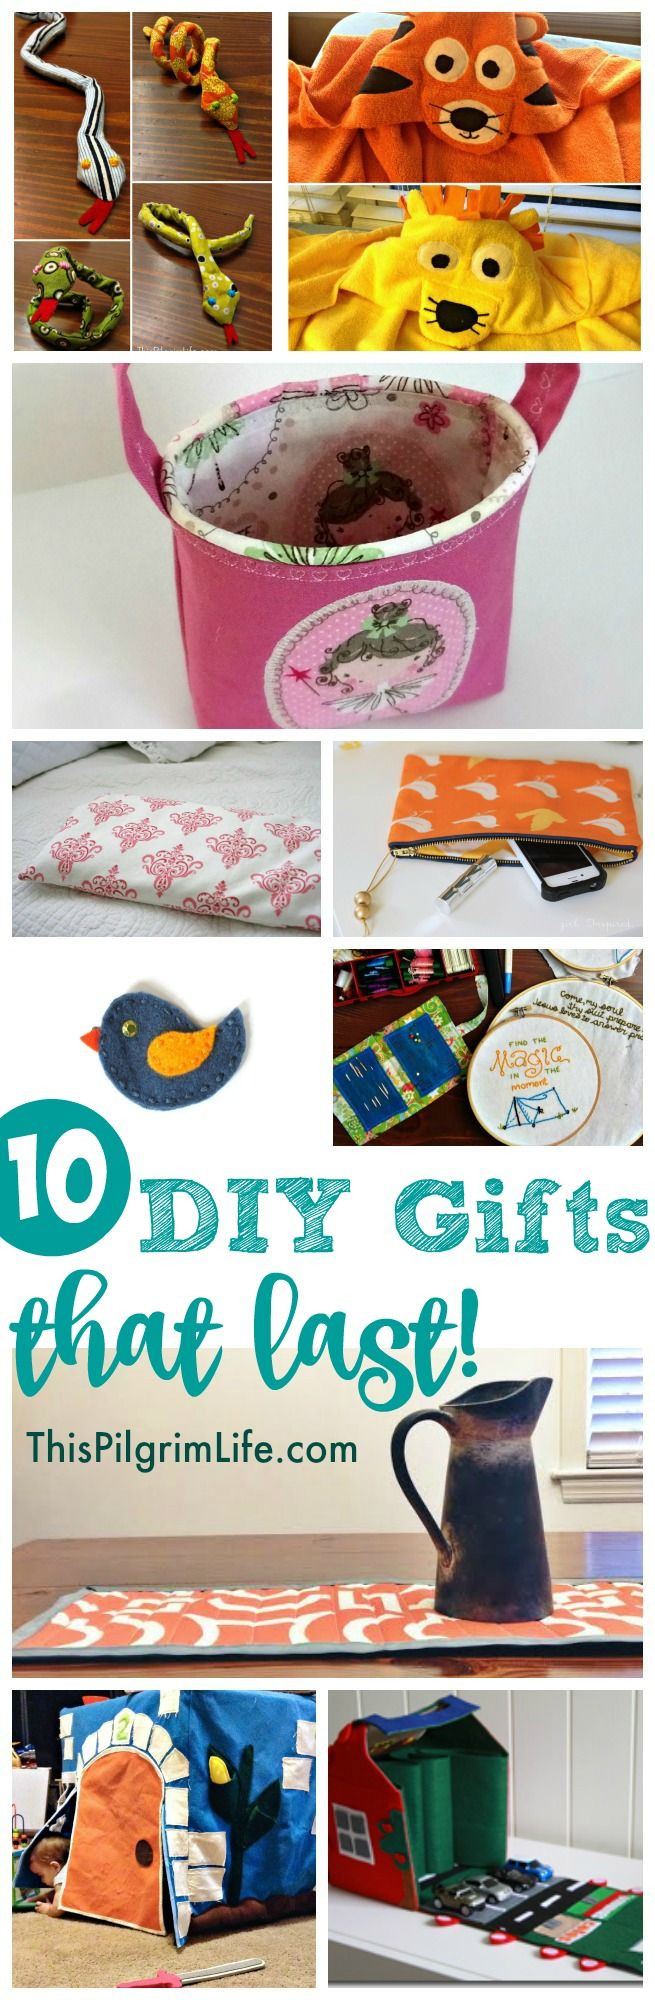 DIY Meaningful Gifts
 17 Best images about Meaningful Gifts on Pinterest